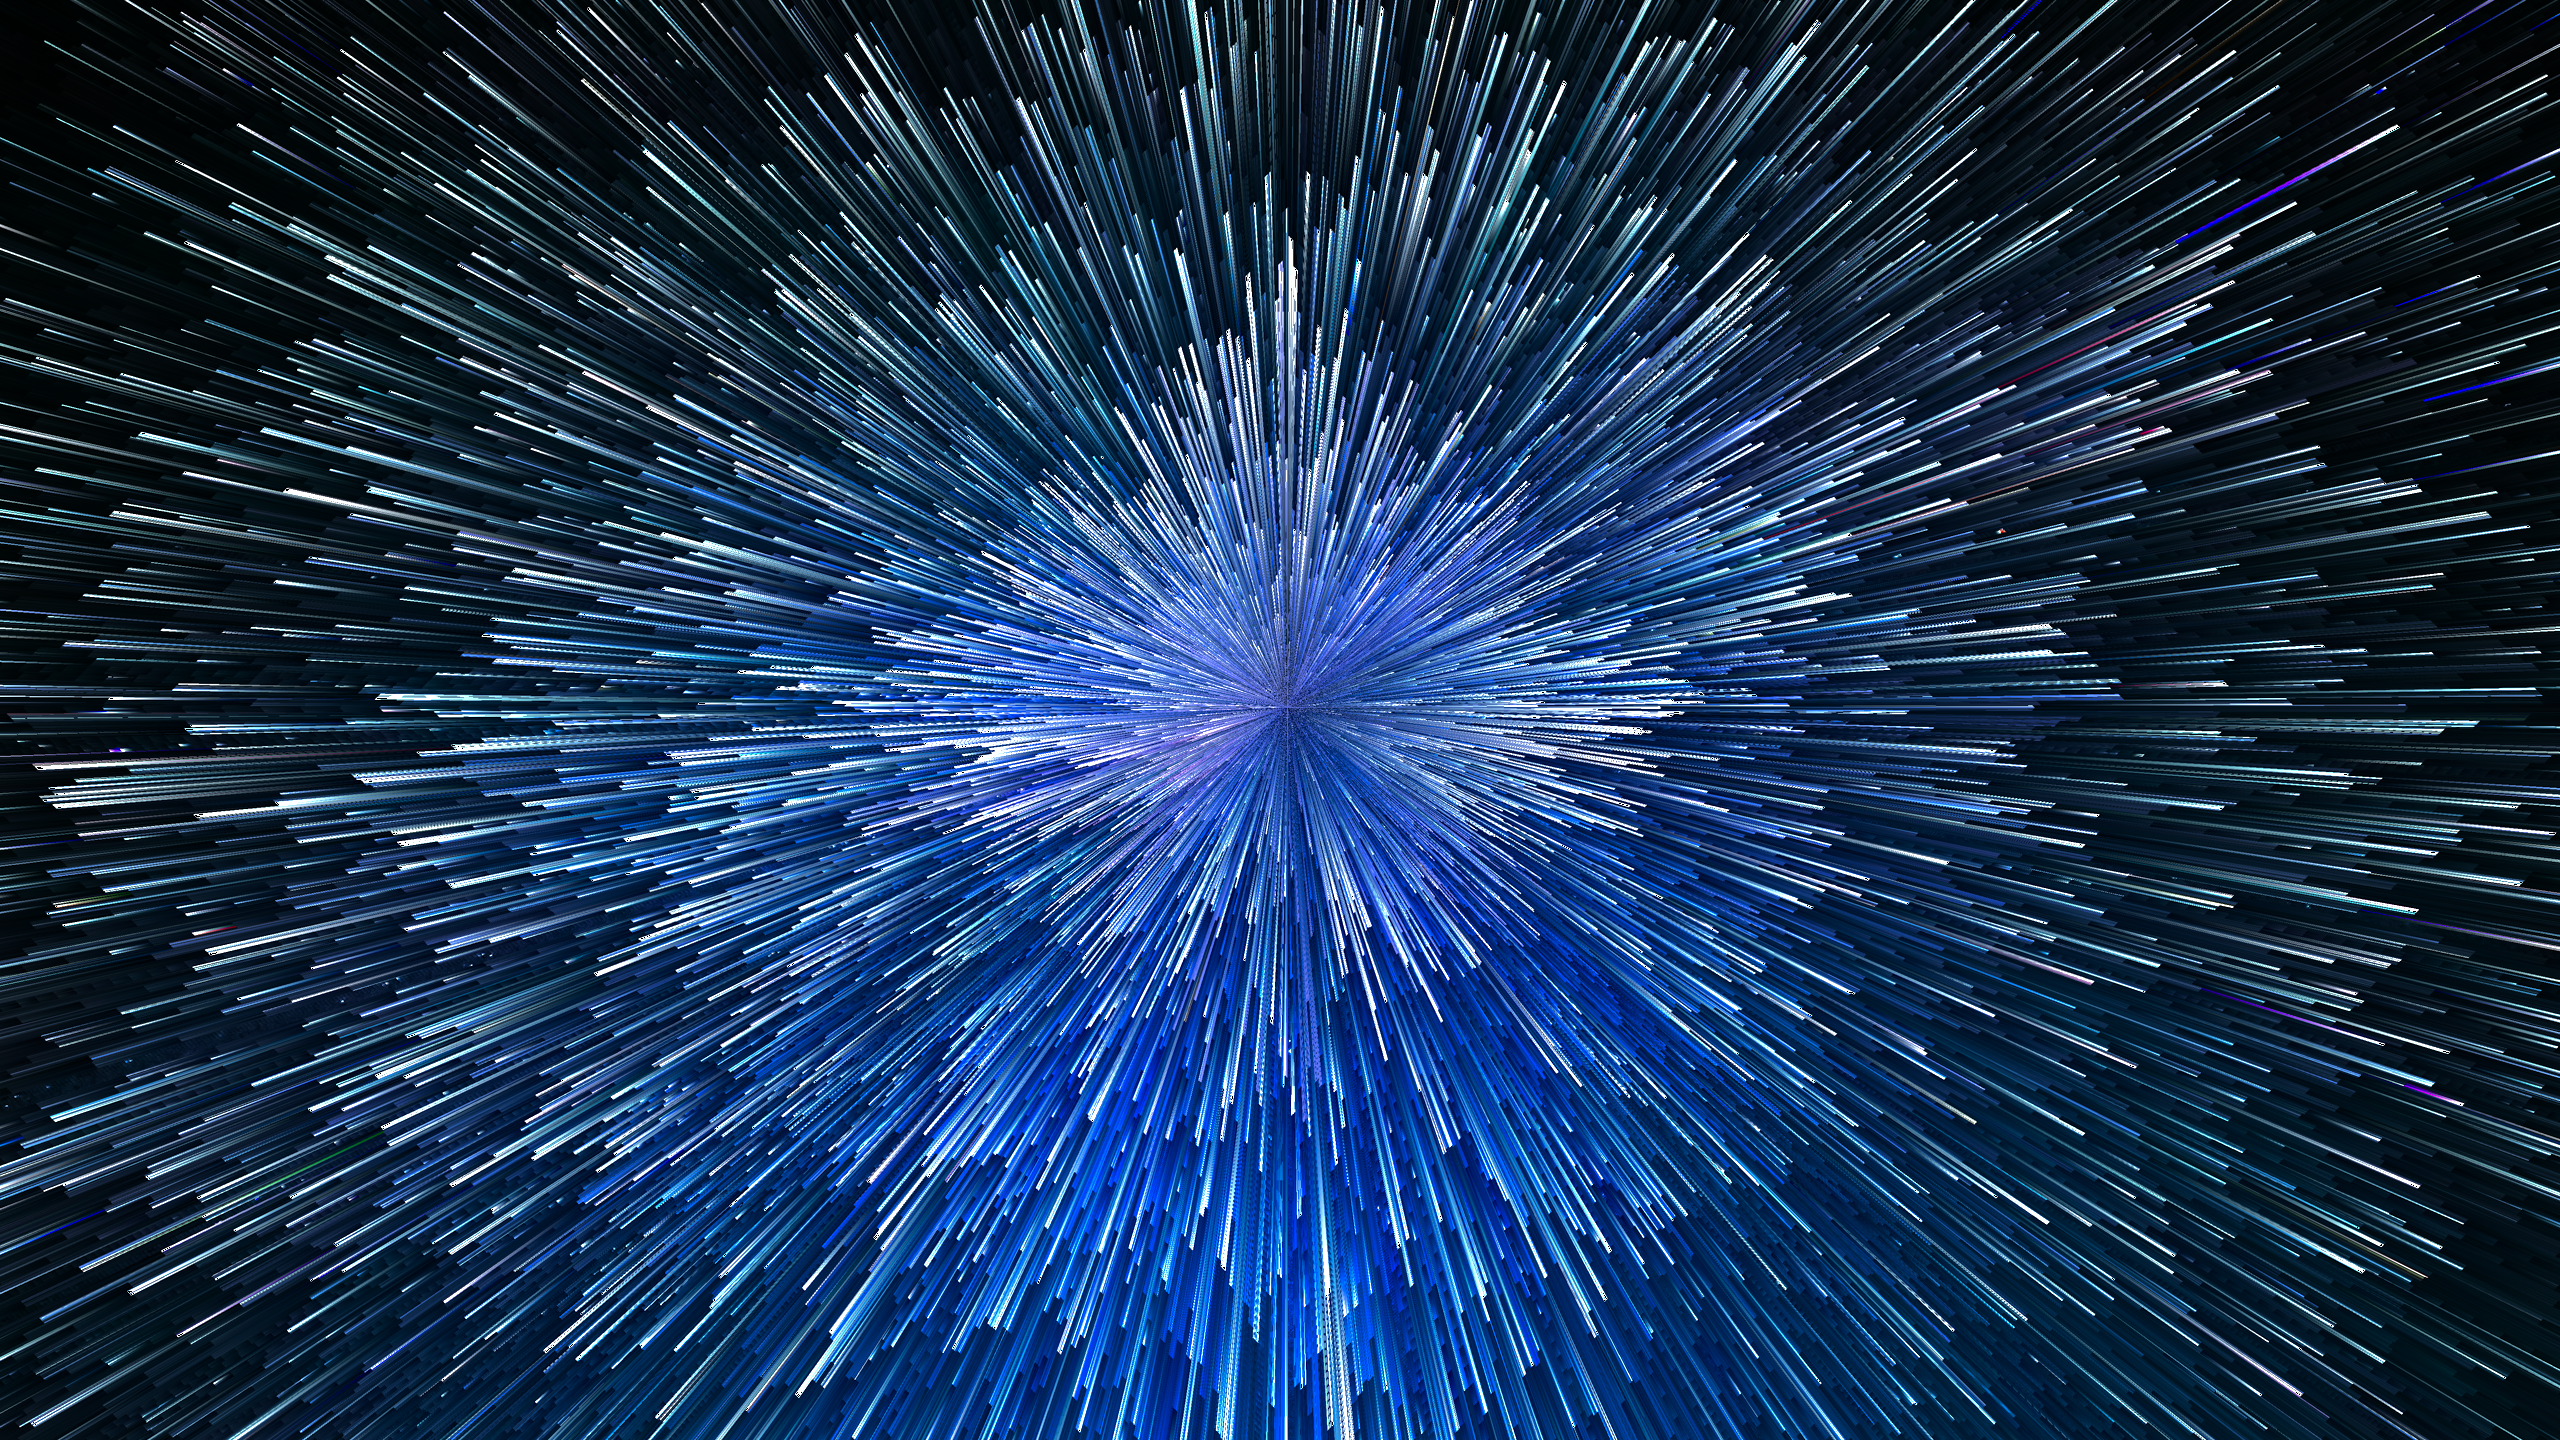 Entering Hyperspace by Leisure Wolf